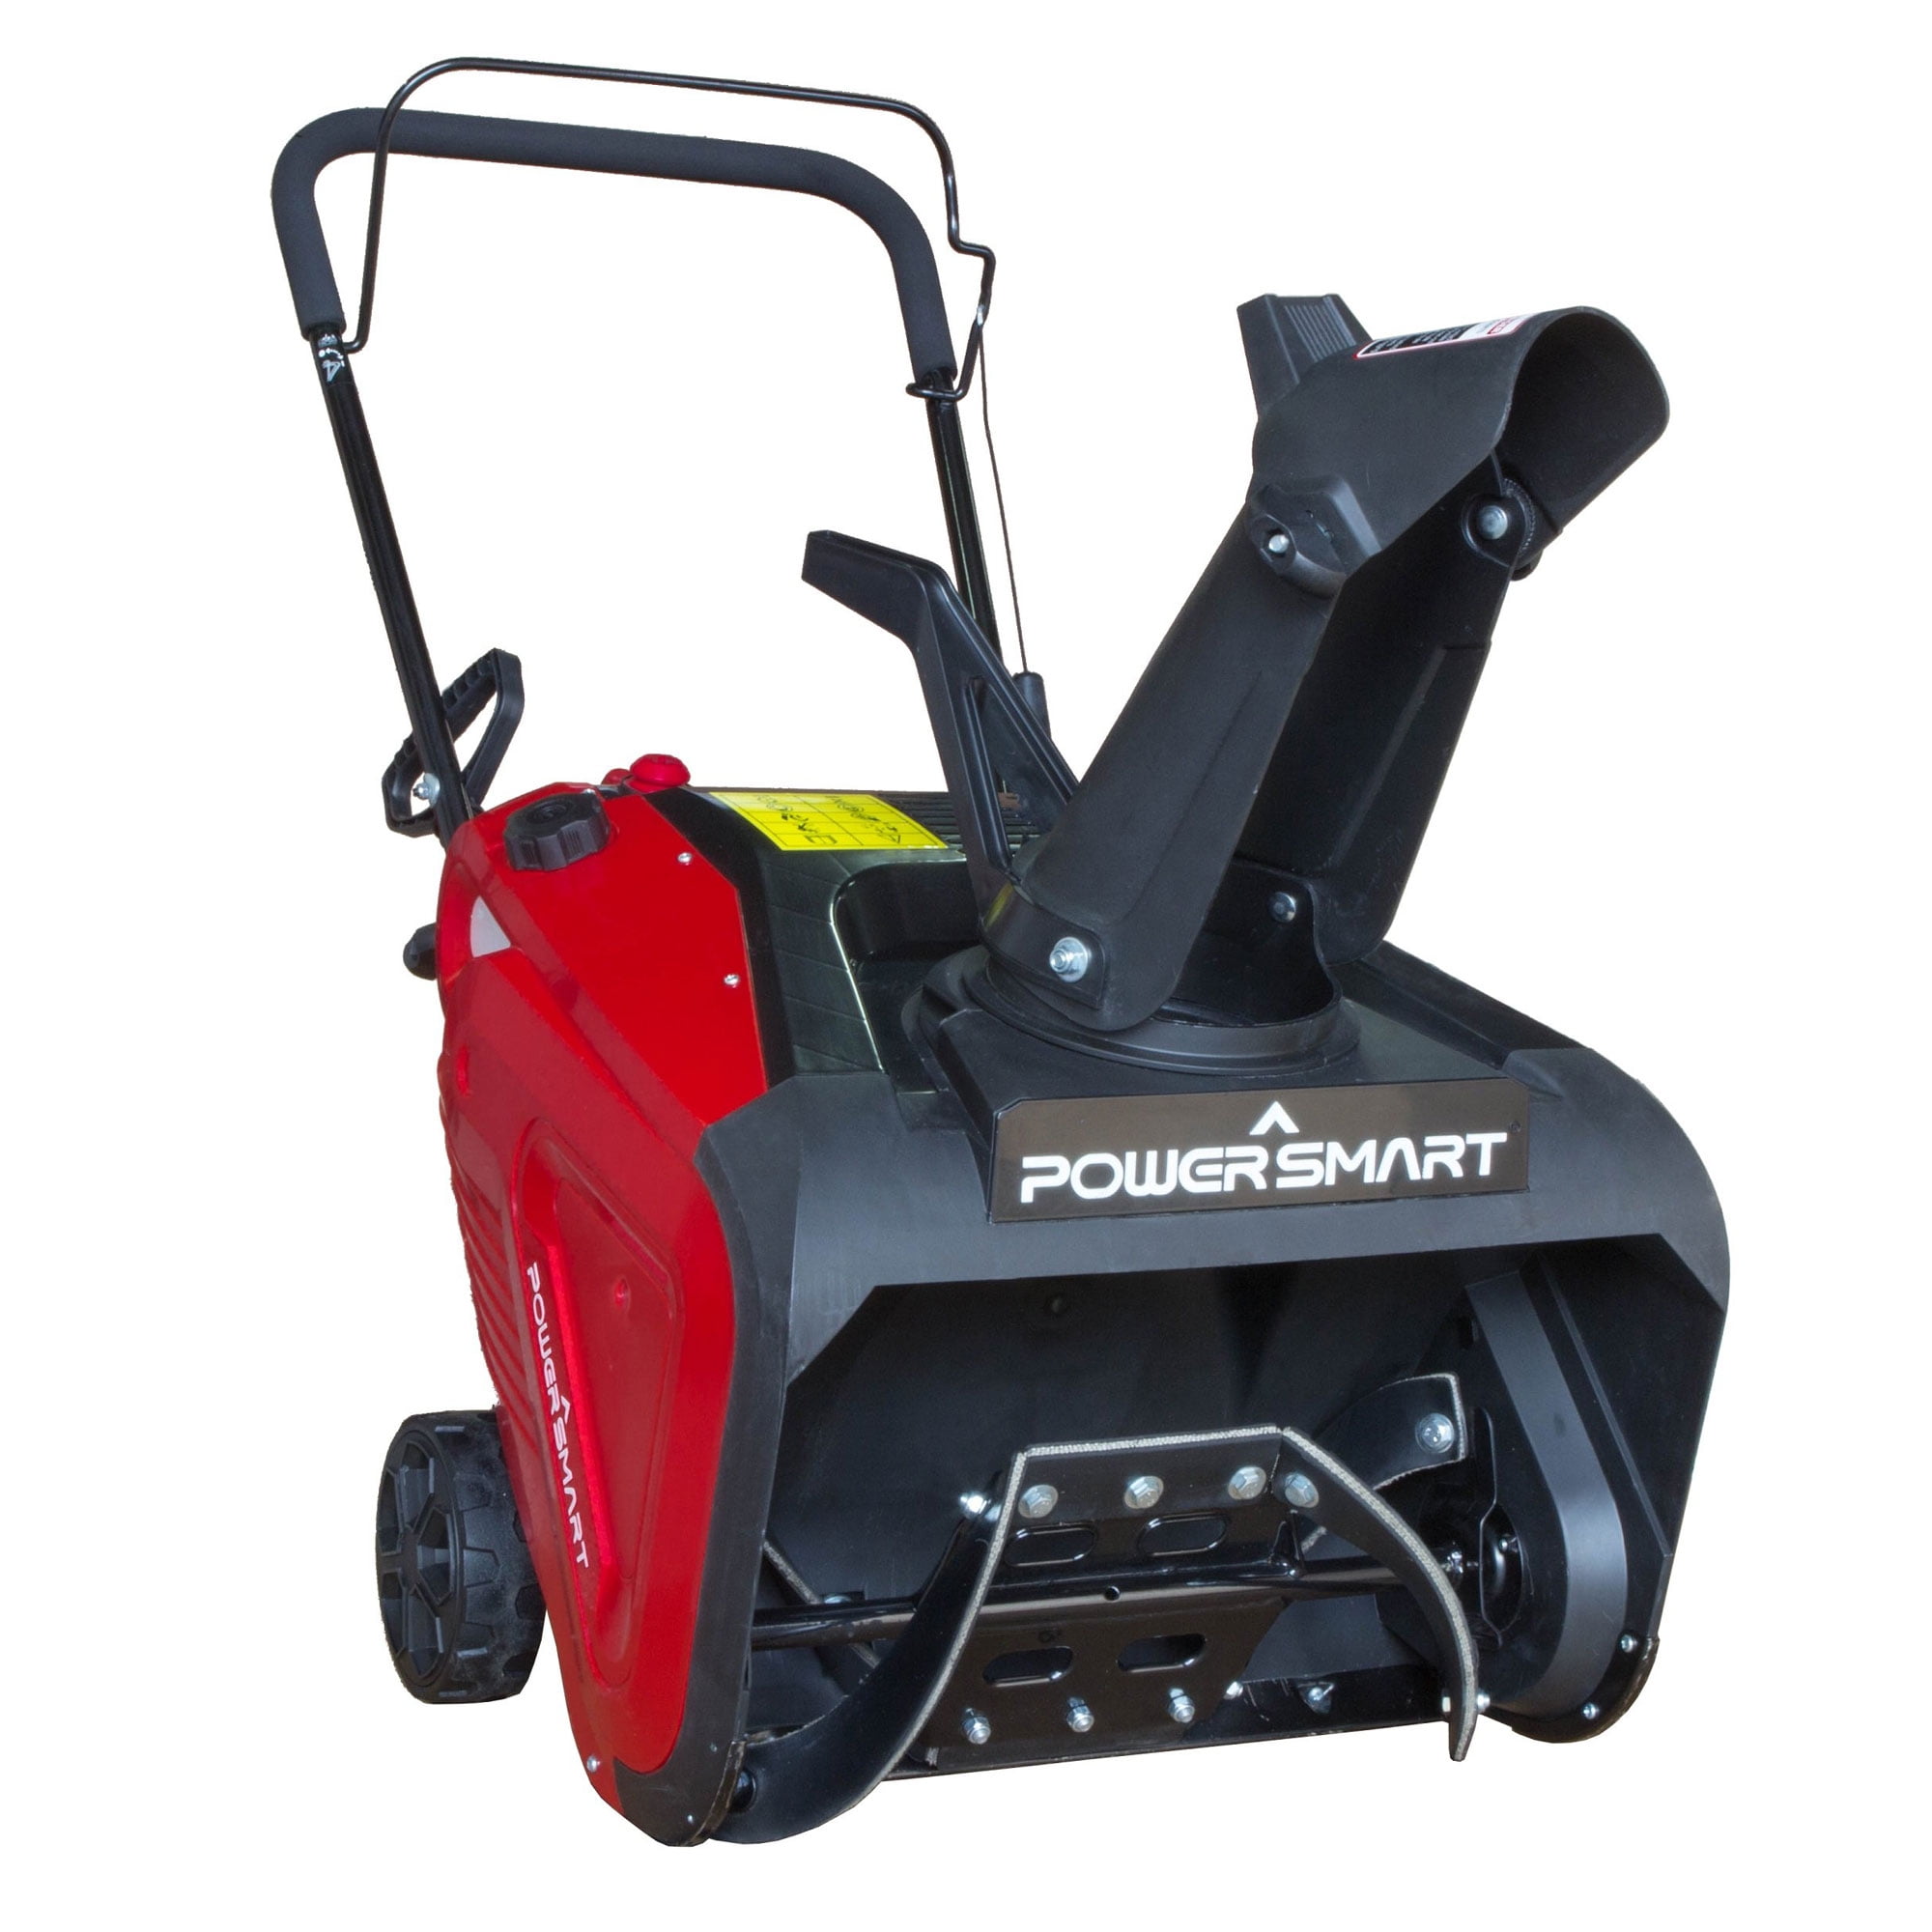 power smart snow blower review